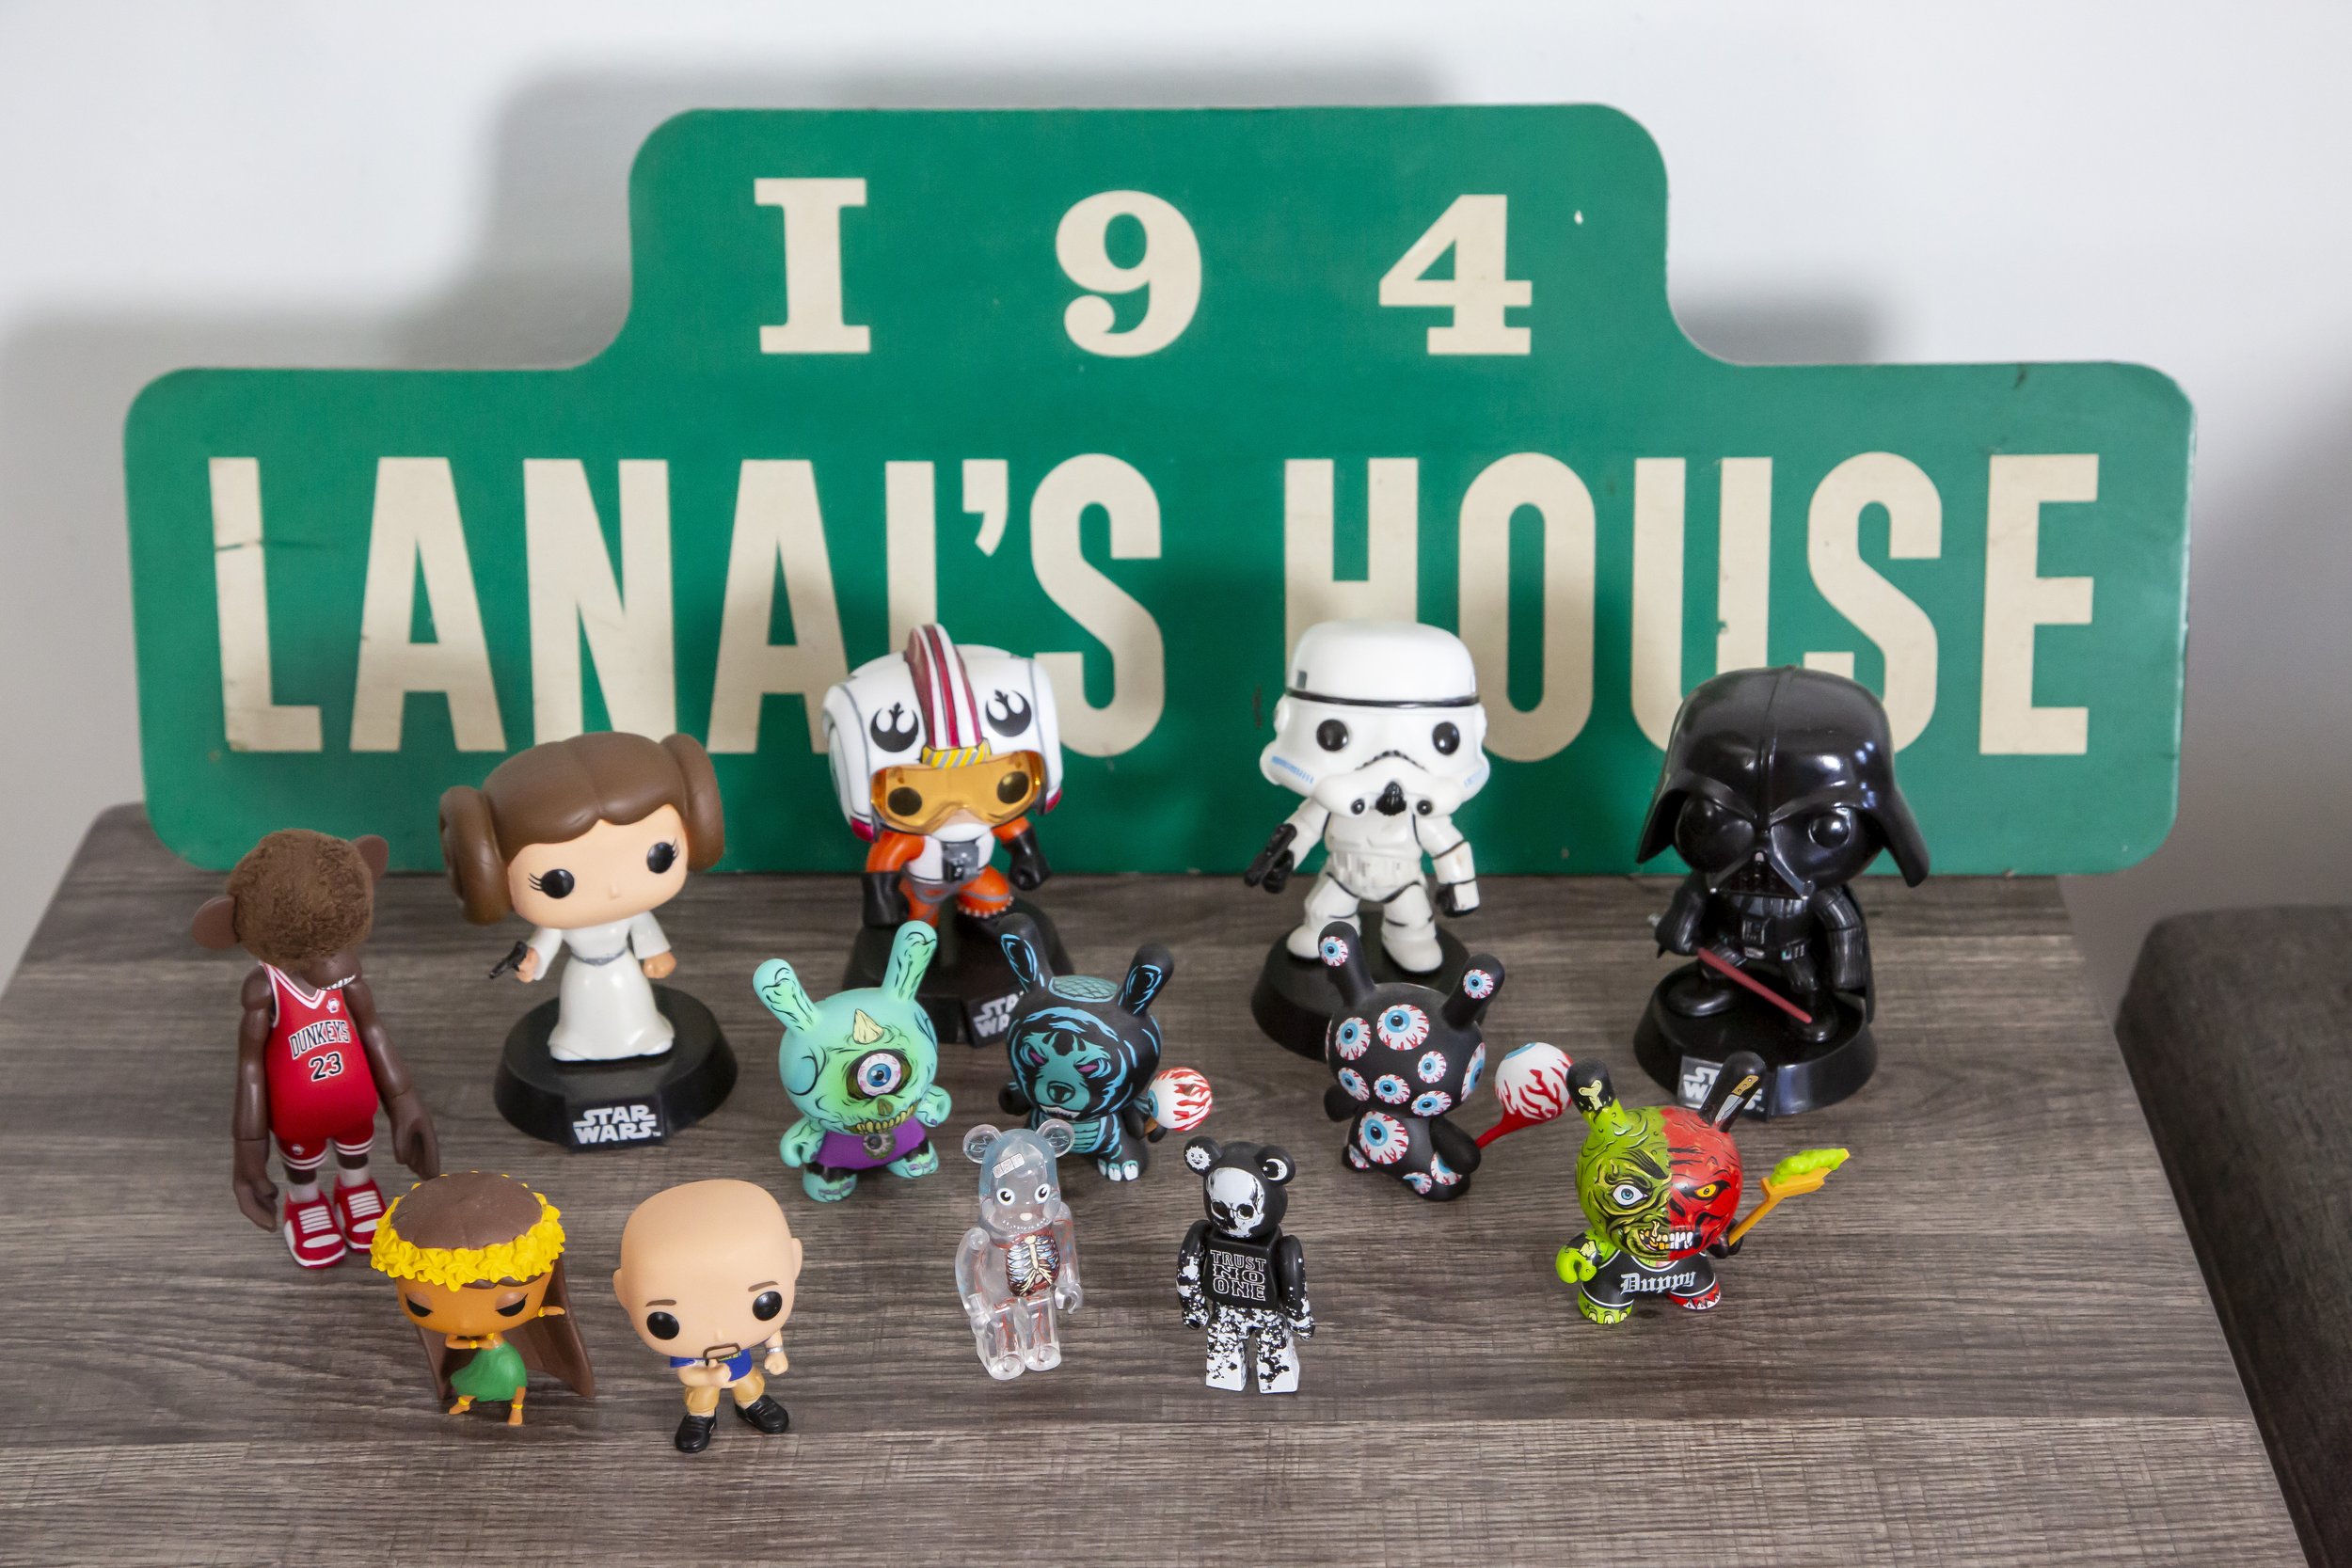  Star Wars, Kikaida and island icons fill Tabura’s array of collectible toys, figurines and vinyl albums.    Photos by Rae Huo  